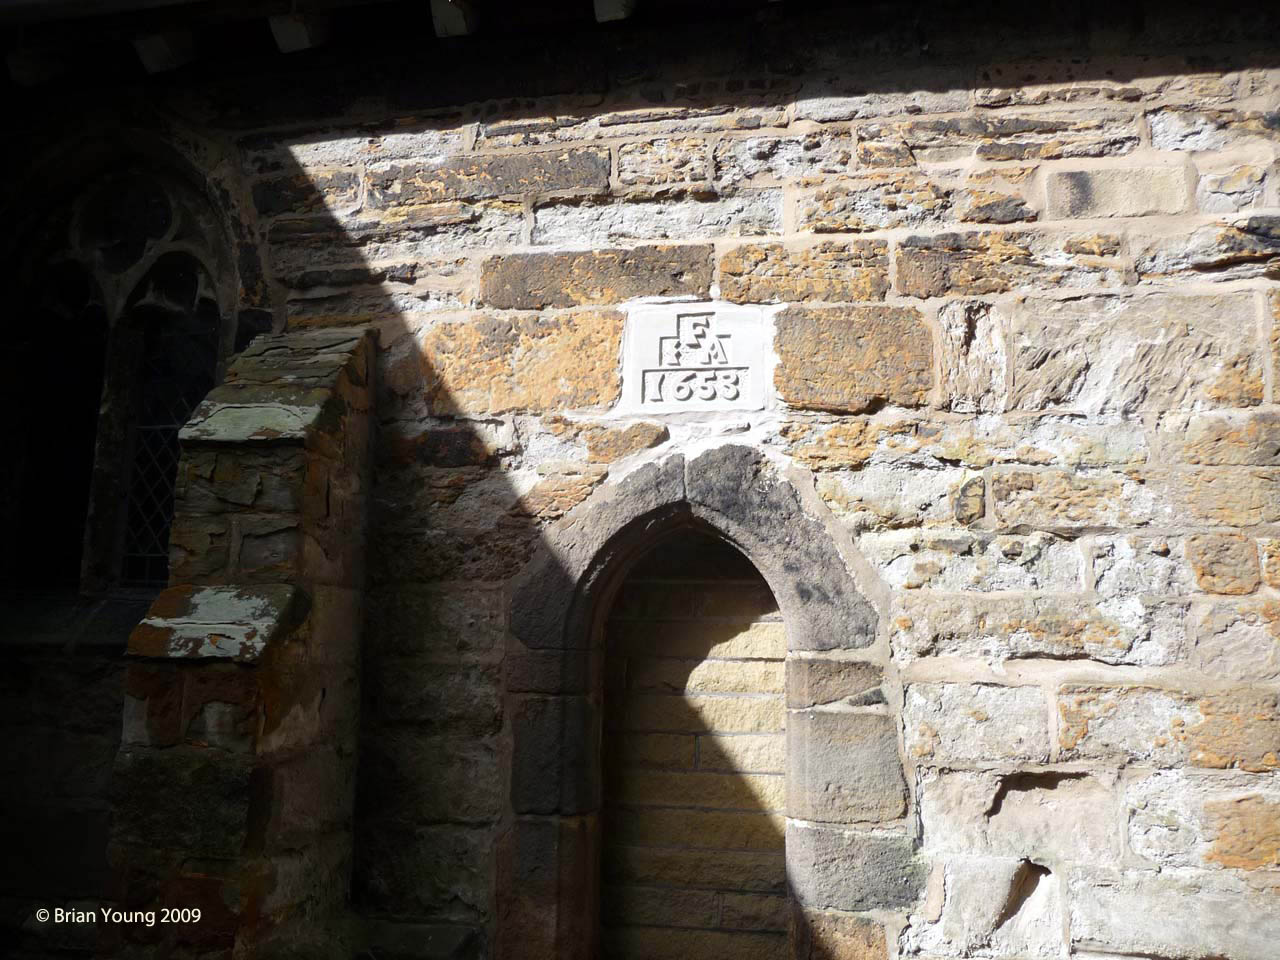 St Mary, date stone, Photograph supplied by and  of Brian Young